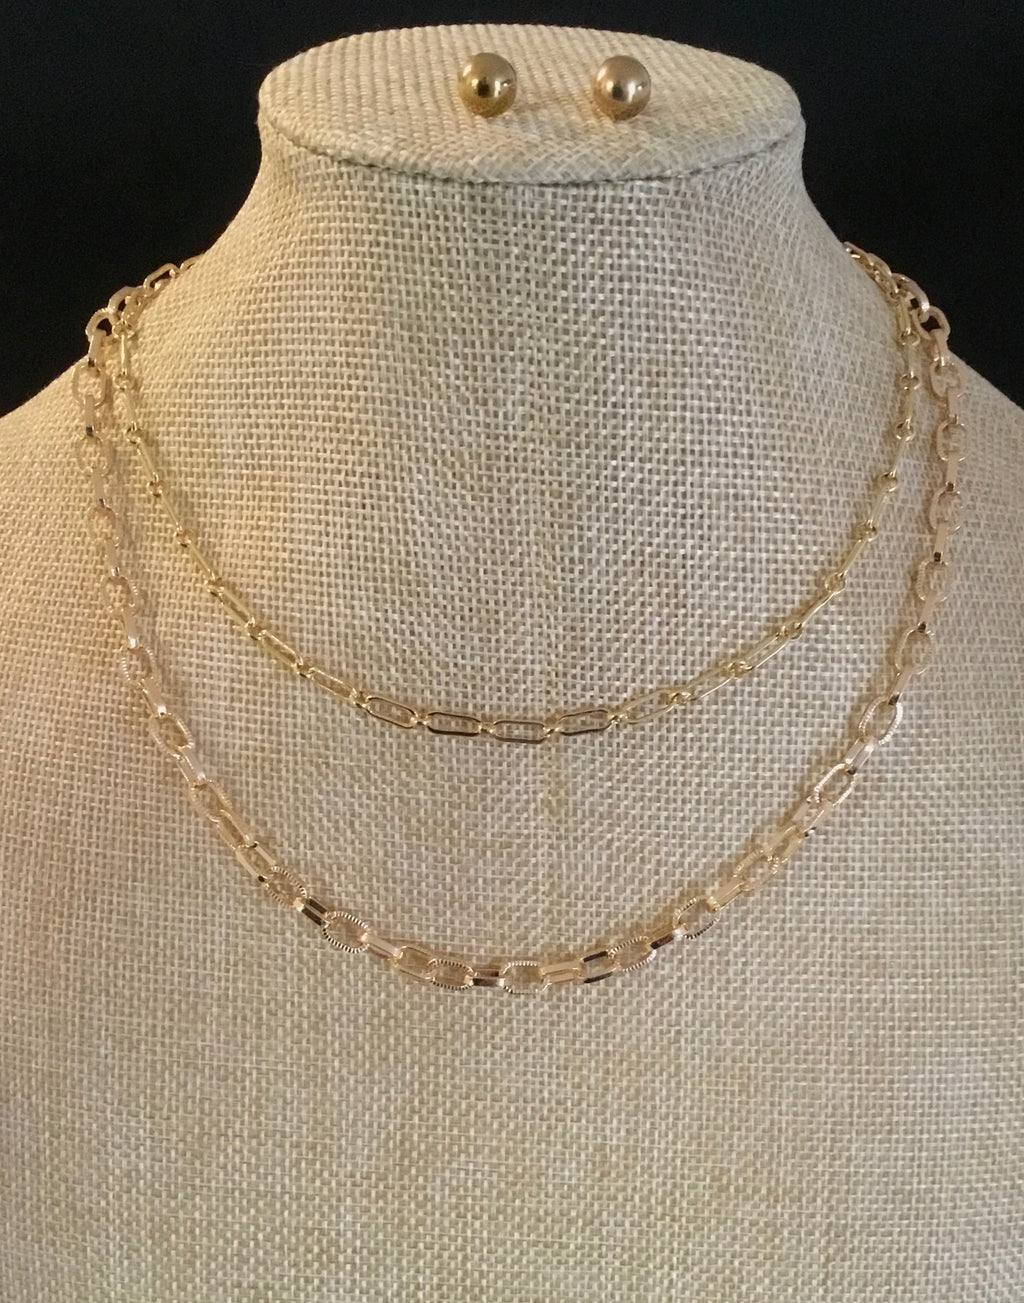 Gold Filled Double Link Necklace and Stud Earrings